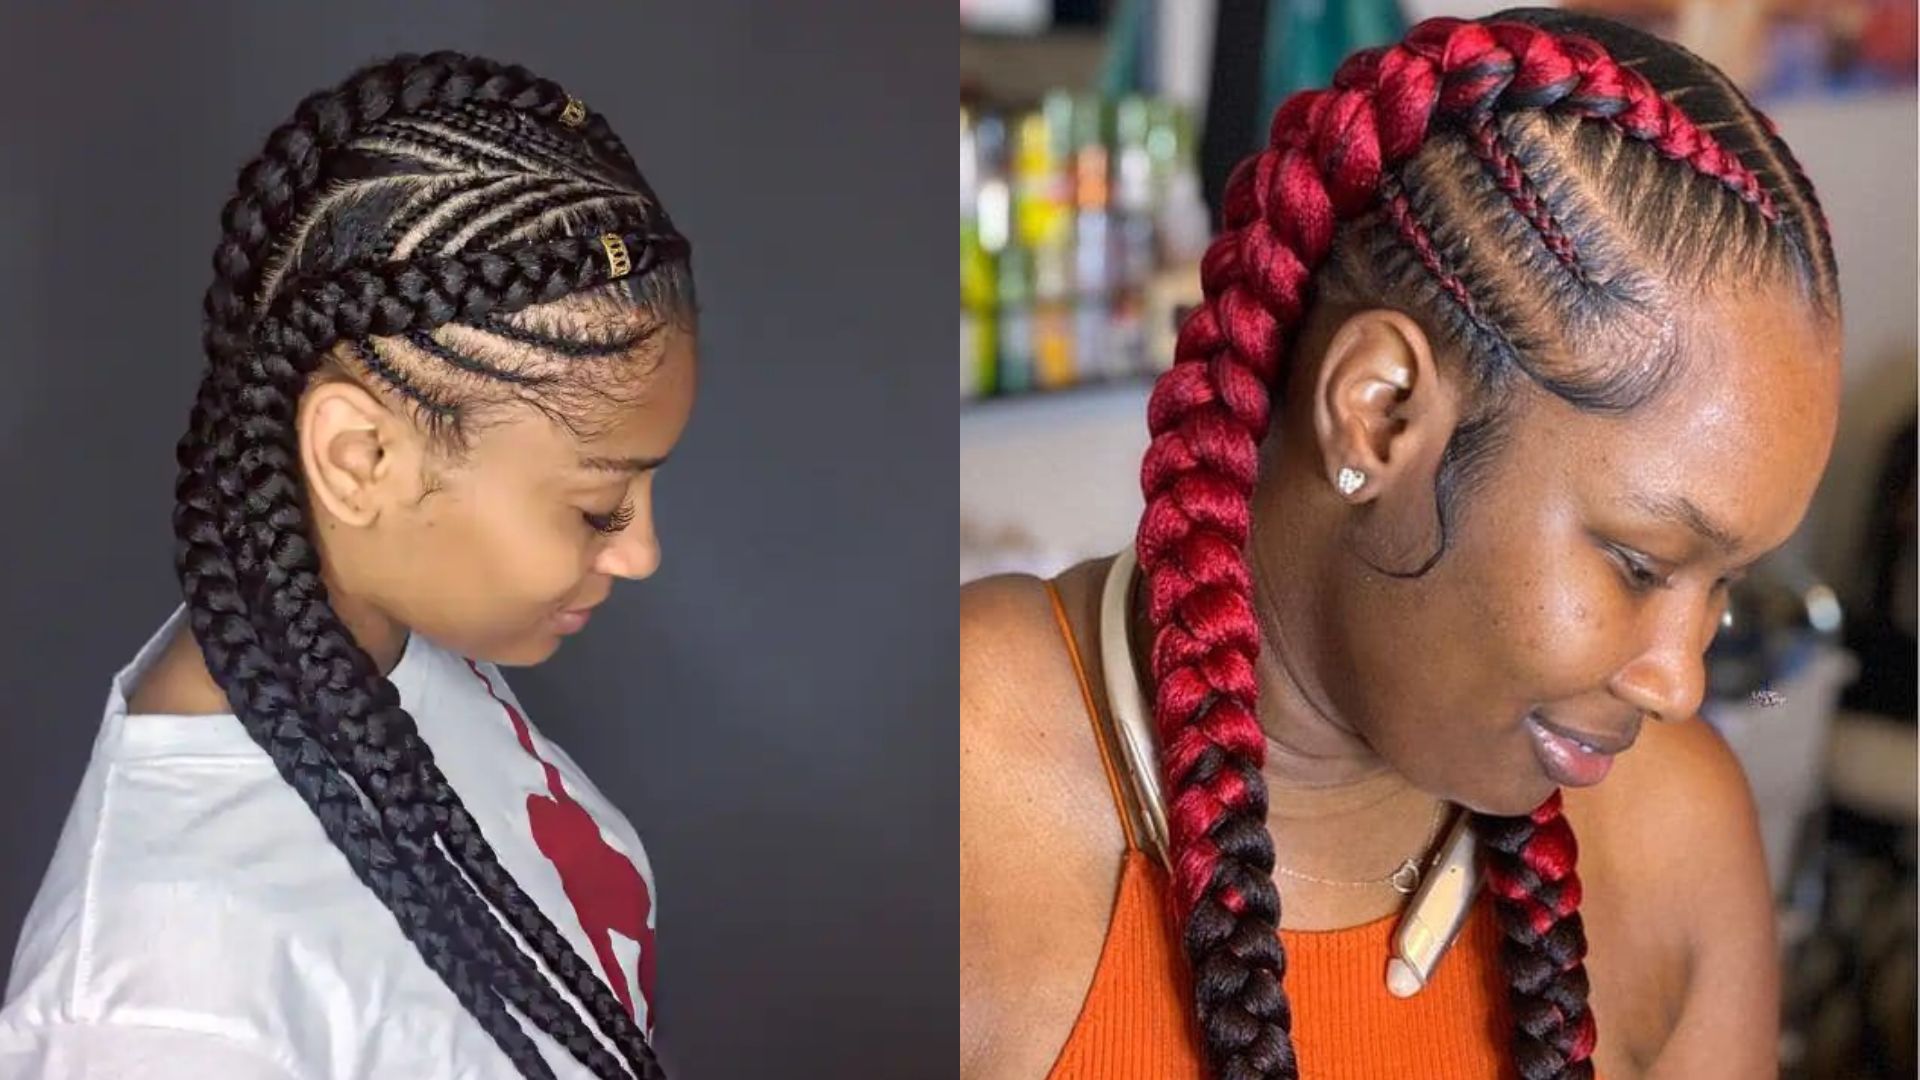 40 Beautiful Braided Updos For Black Women. - YouTube